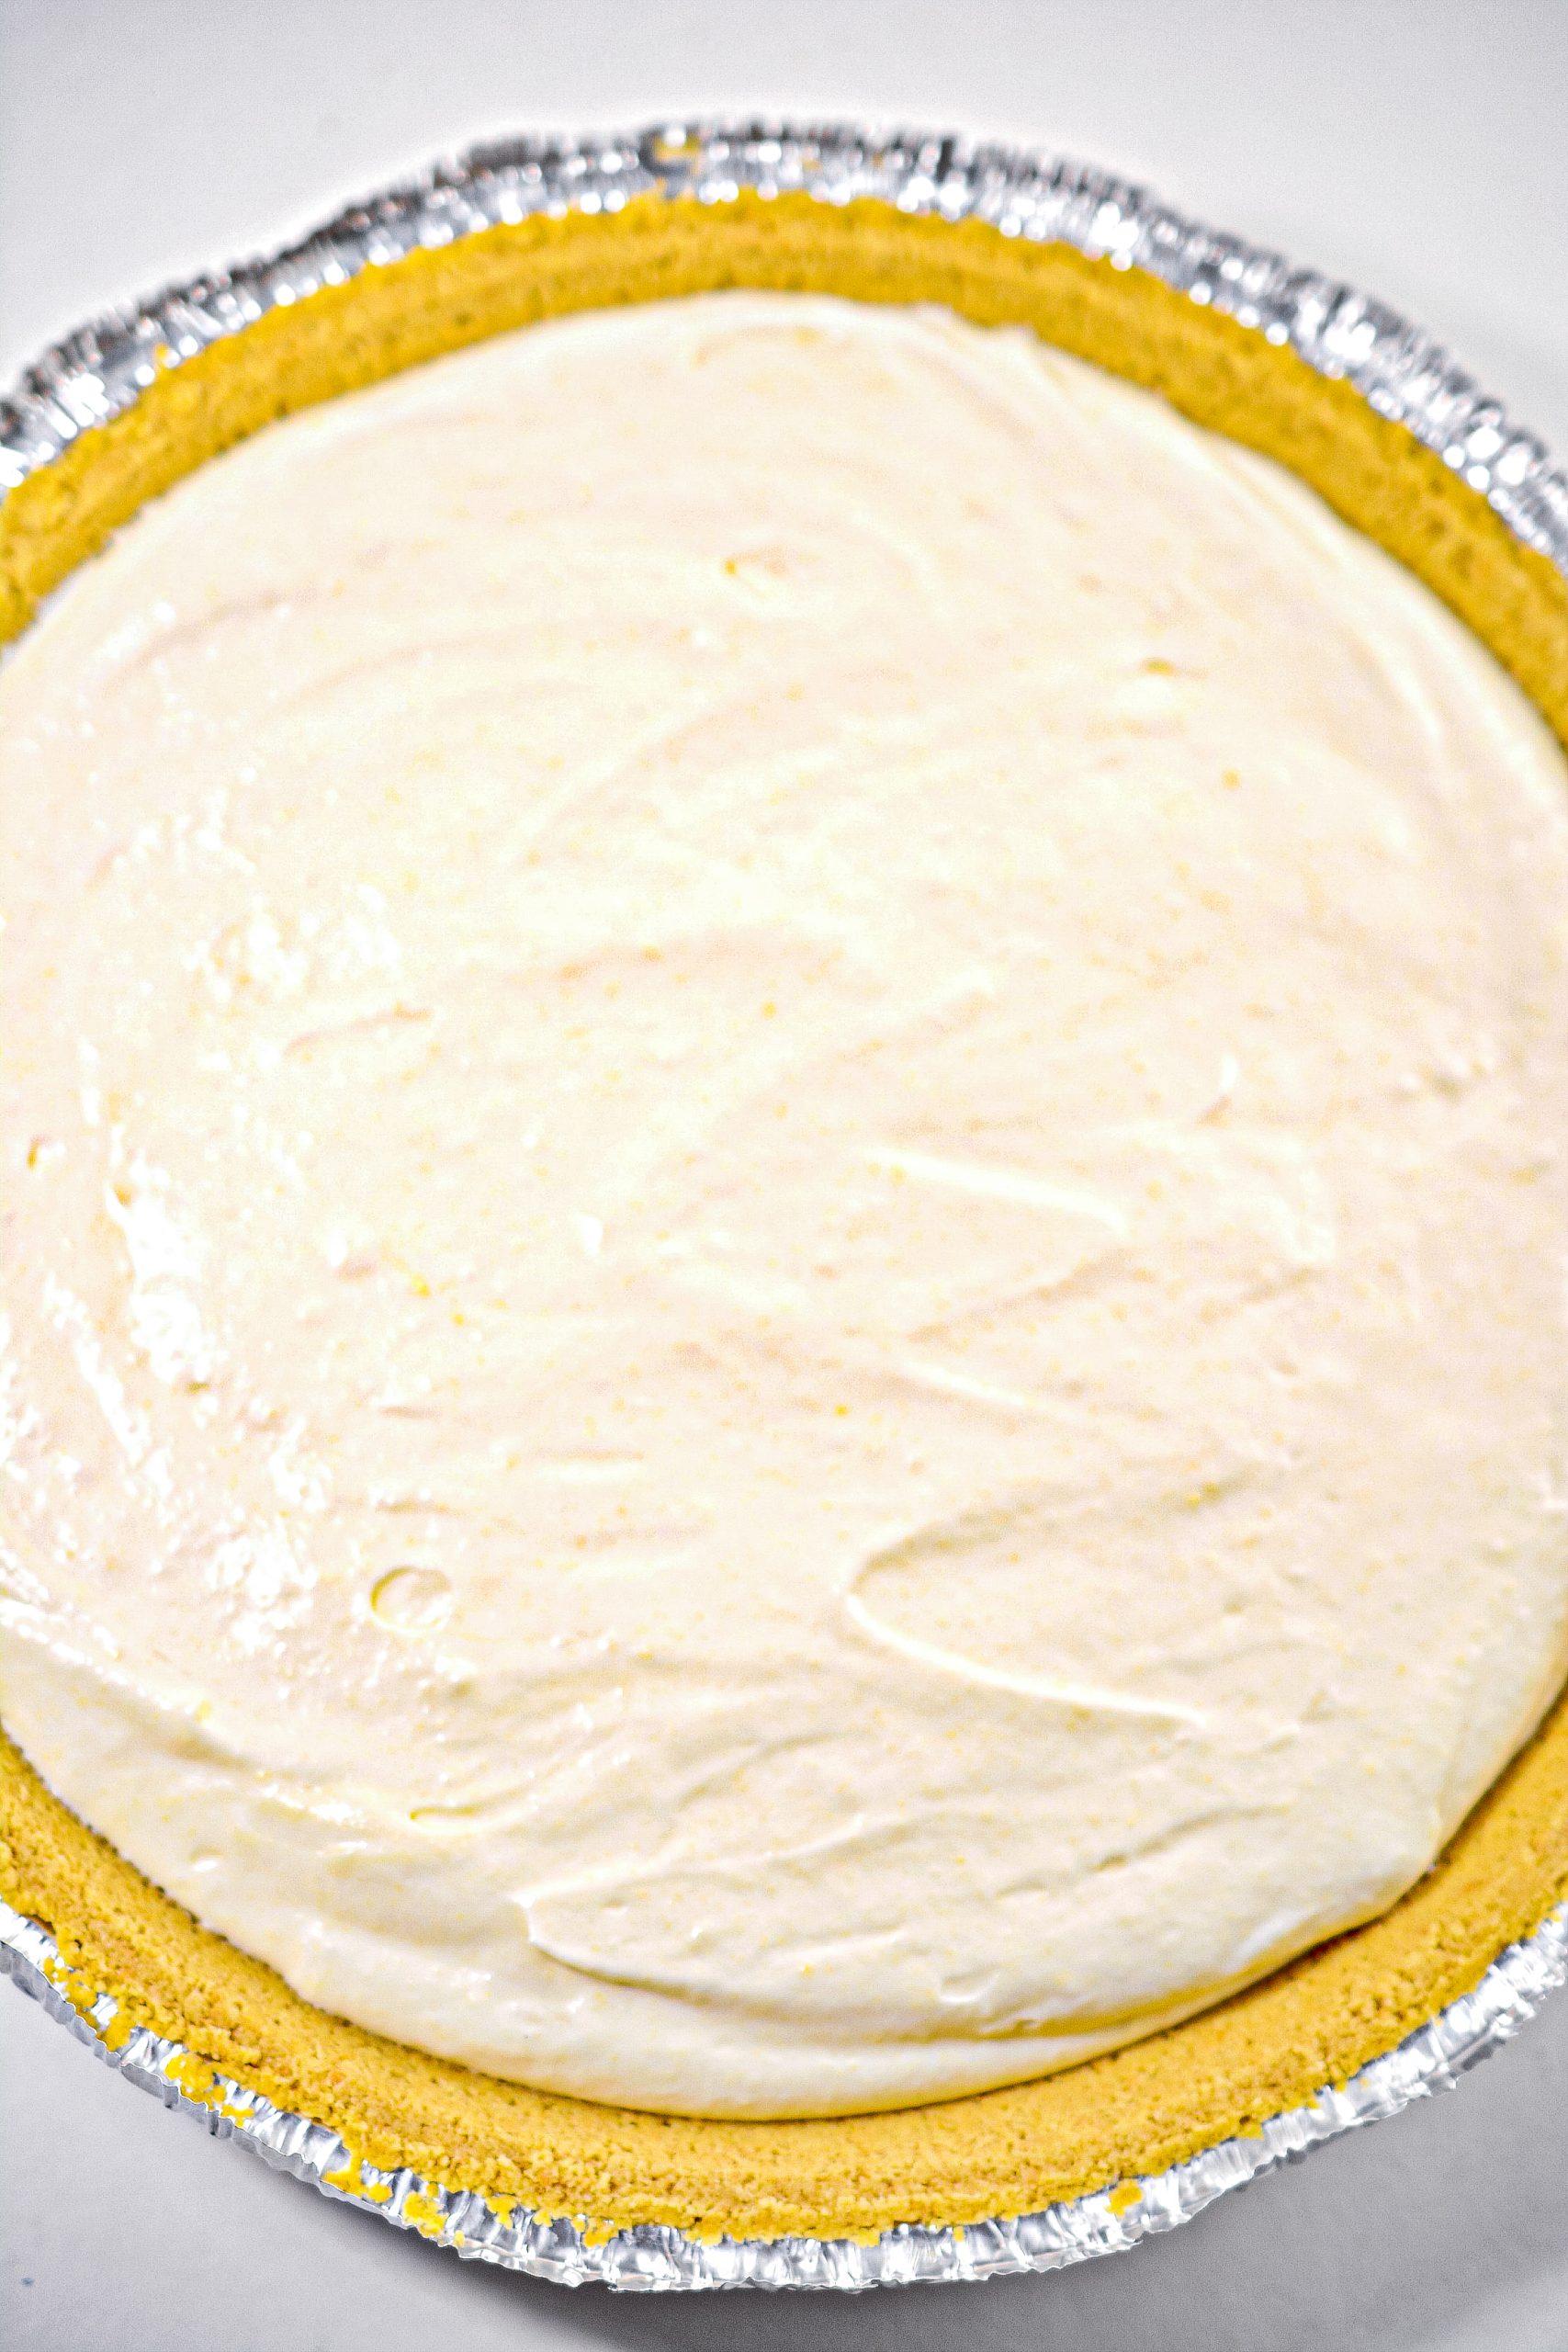 Pour the cheesecake mixture into the prepared pie crust